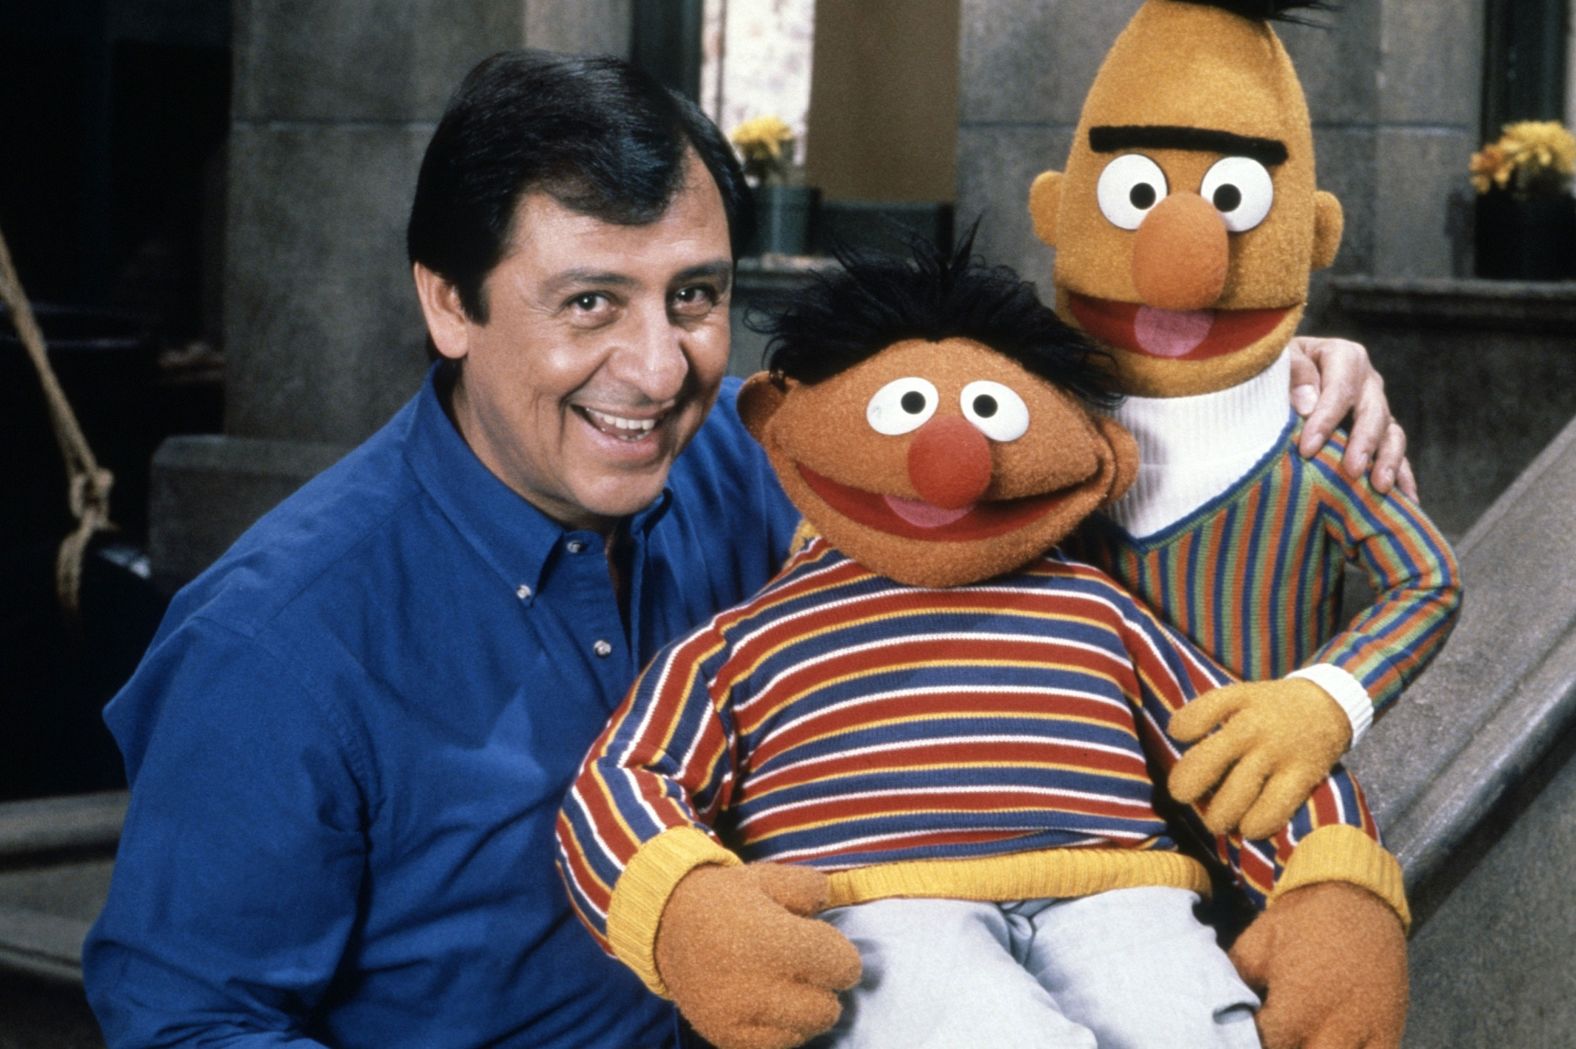 Emilio Delgado, who played the Fix-It Shop owner Luis on "Sesame Street," died on March 10, <a href="index.php?page=&url=https%3A%2F%2Fwww.cnn.com%2F2022%2F03%2F10%2Fentertainment%2Femilio-delgado-obituary%2Findex.html" target="_blank">according to his manager.</a> He had been diagnosed with multiple myeloma, a blood cancer, in 2020, according to a report from TMZ, citing his wife. Delgado was 81.